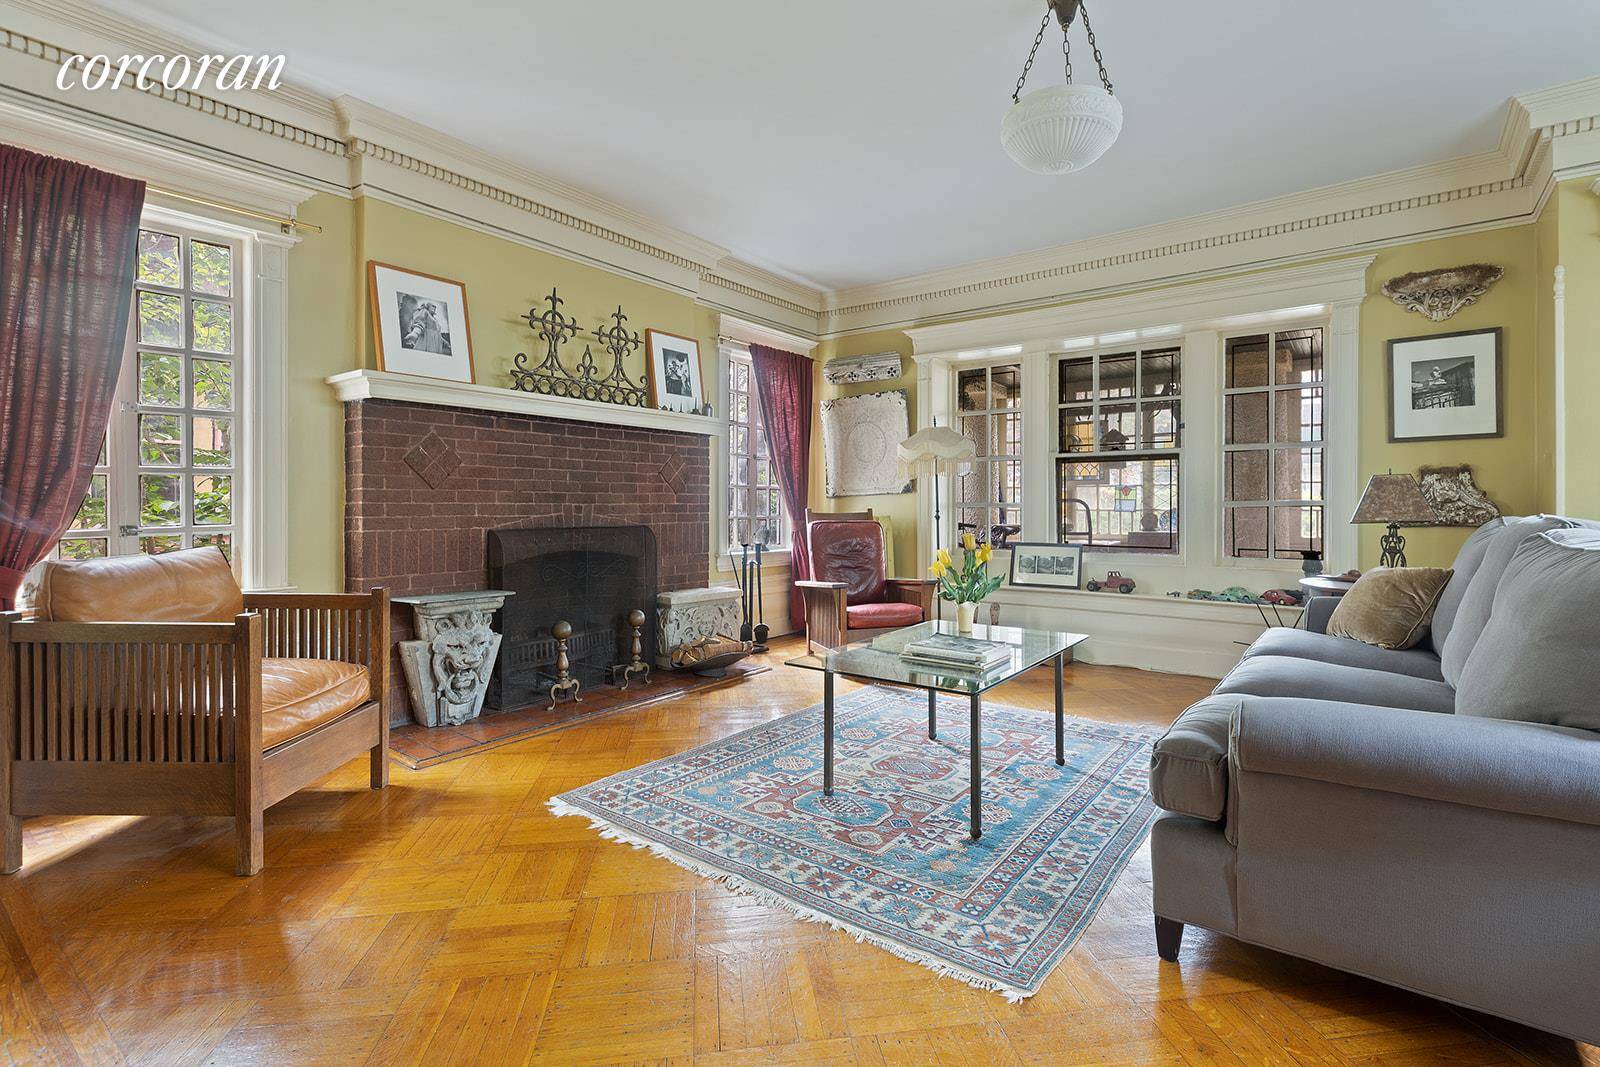 Welcome to the most charming Craftsman style Bungalow in Ditmas Park.